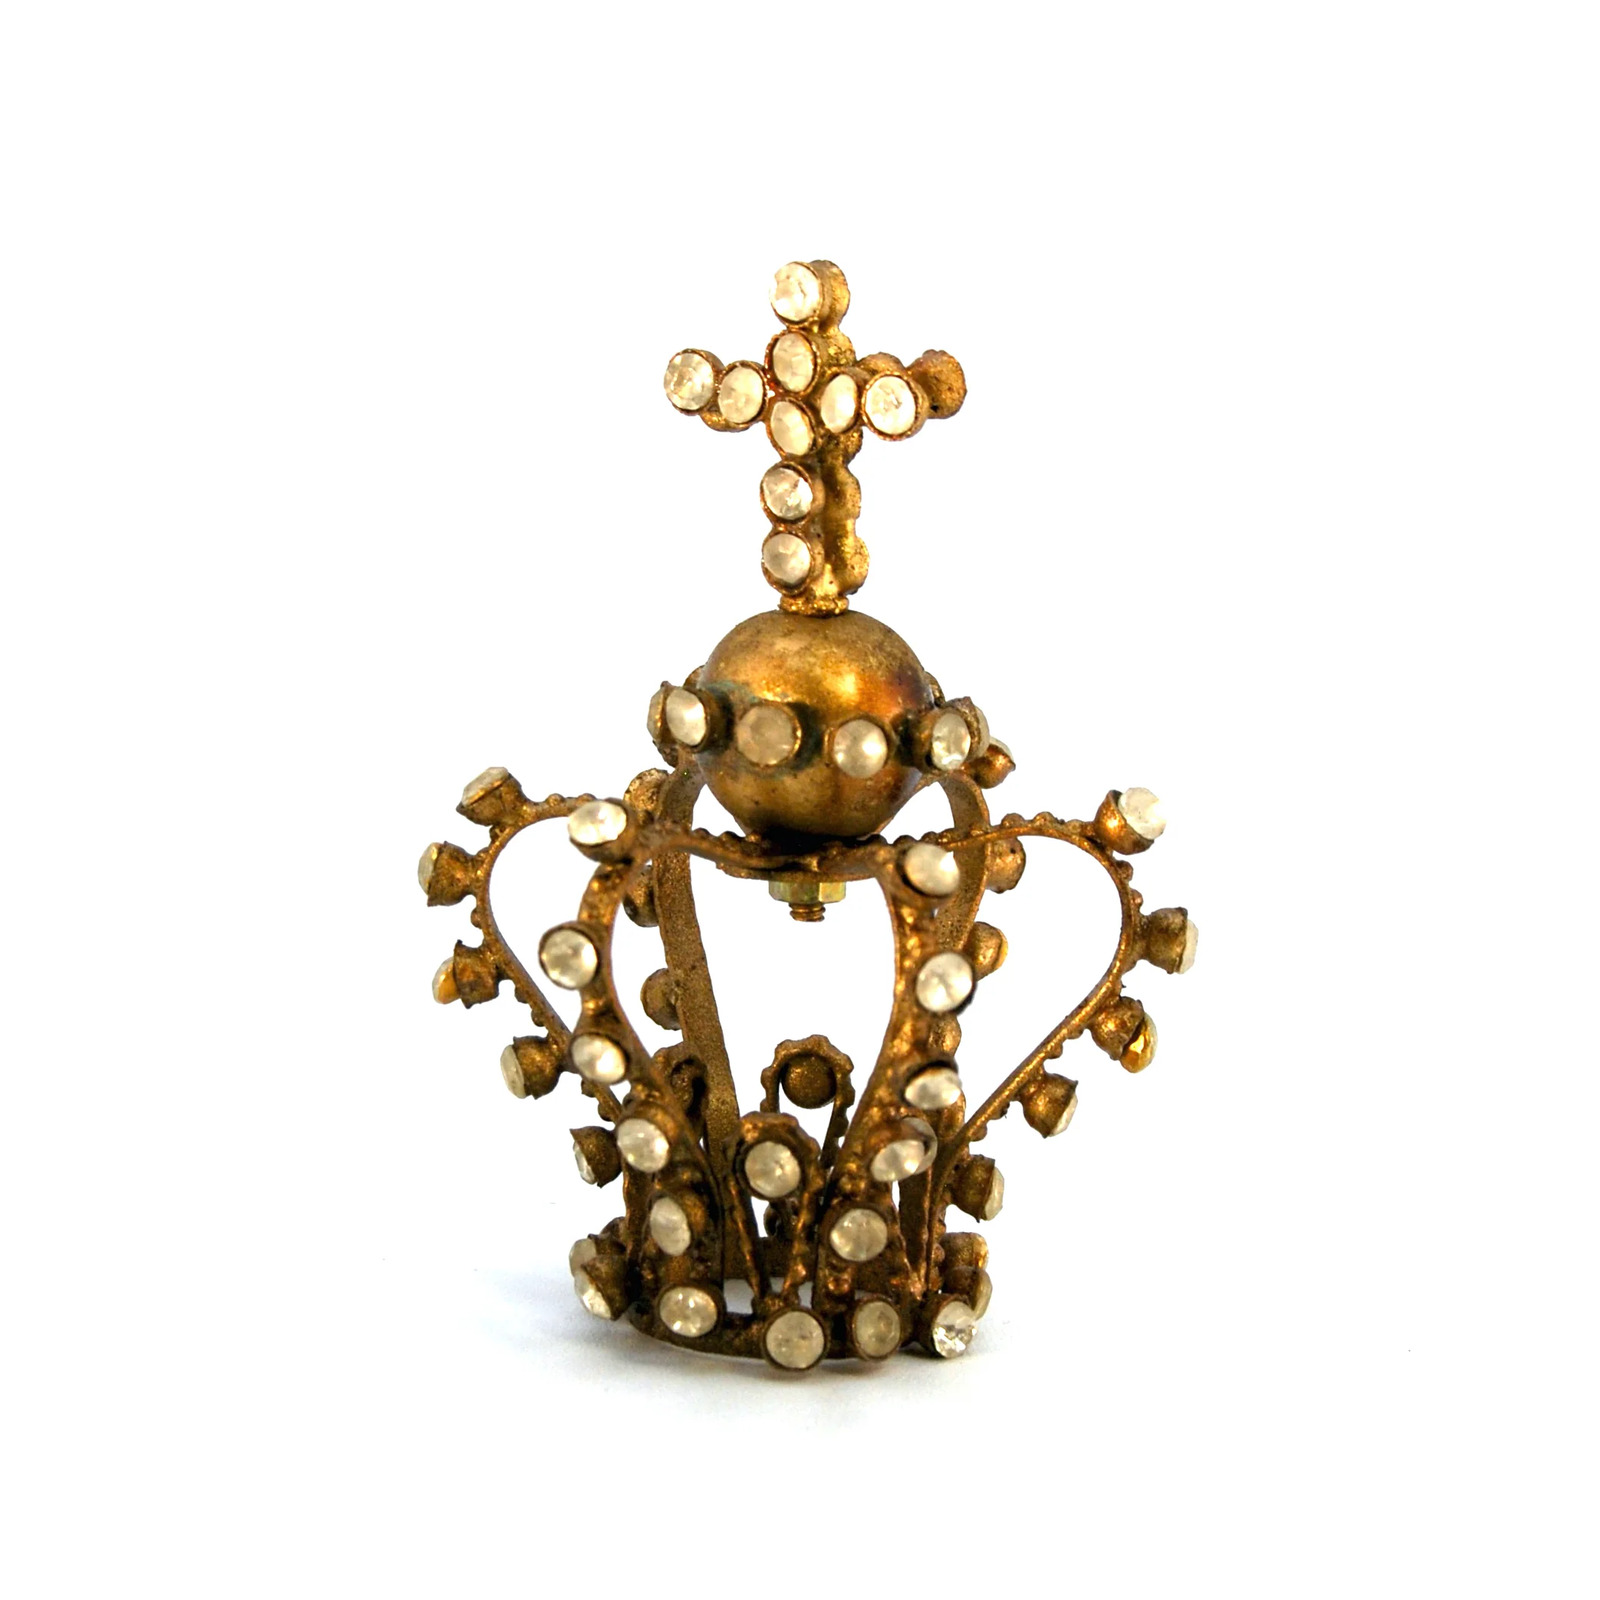 1in Tiny Jeweled Santos Kings Crown, Ornate Antiqued Gold Rhinestone Orb and Cro